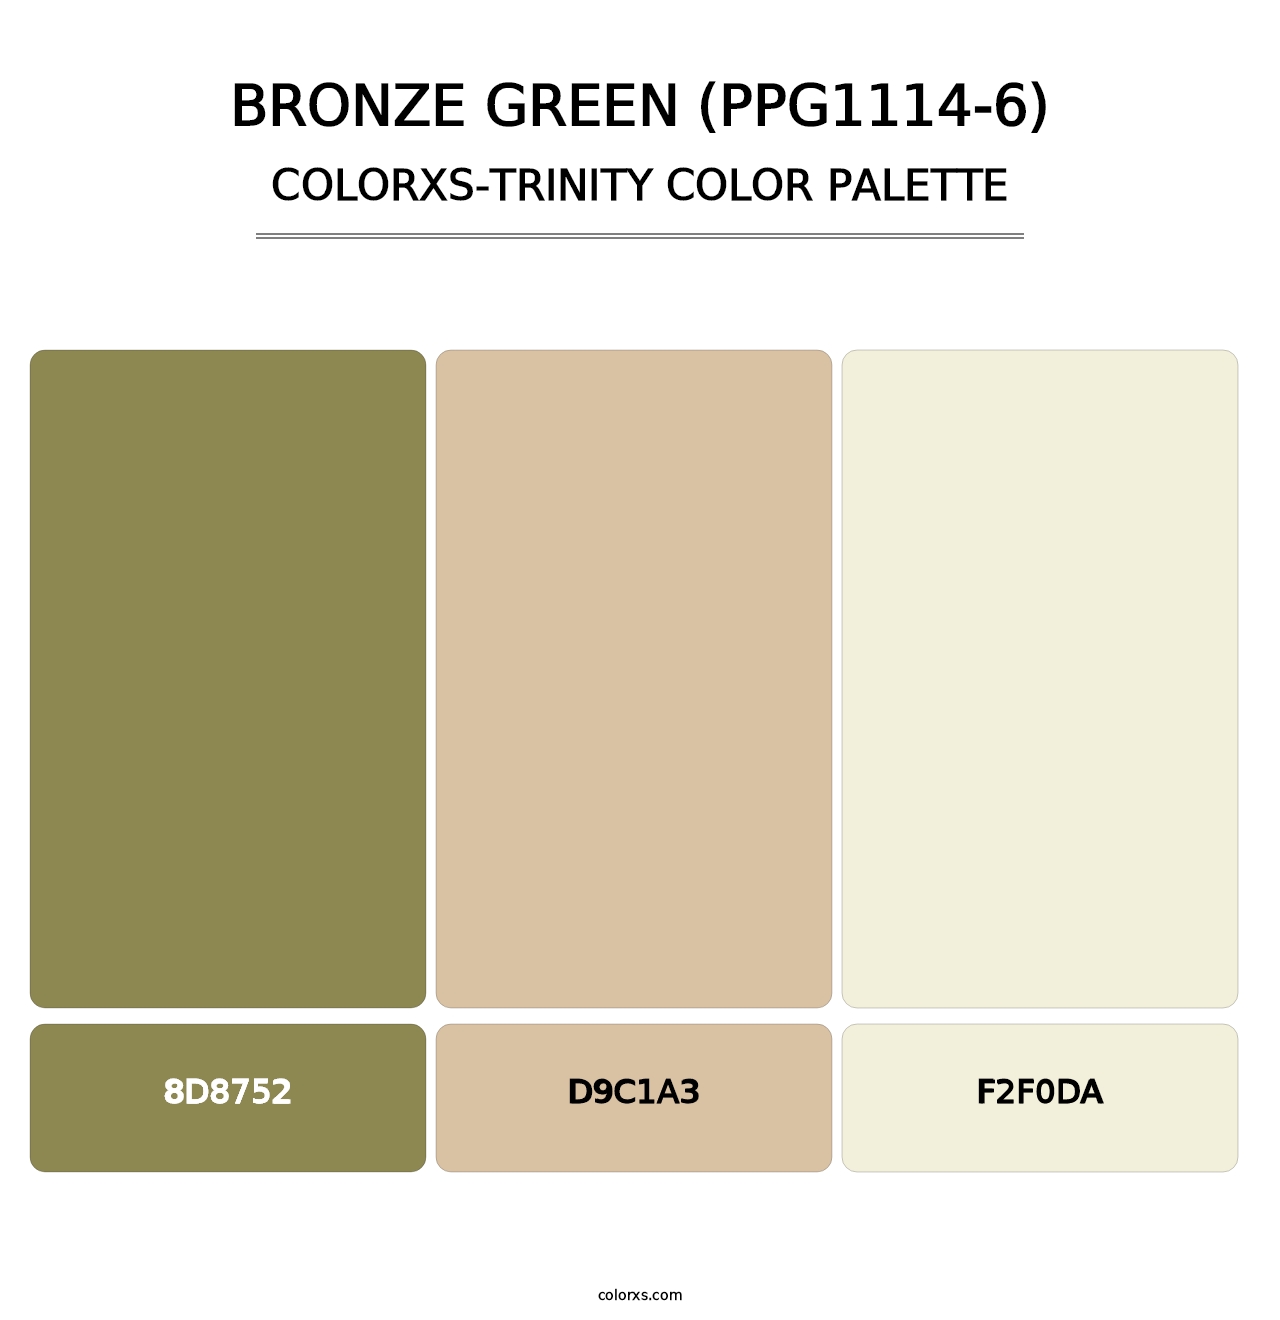 Bronze Green (PPG1114-6) - Colorxs Trinity Palette